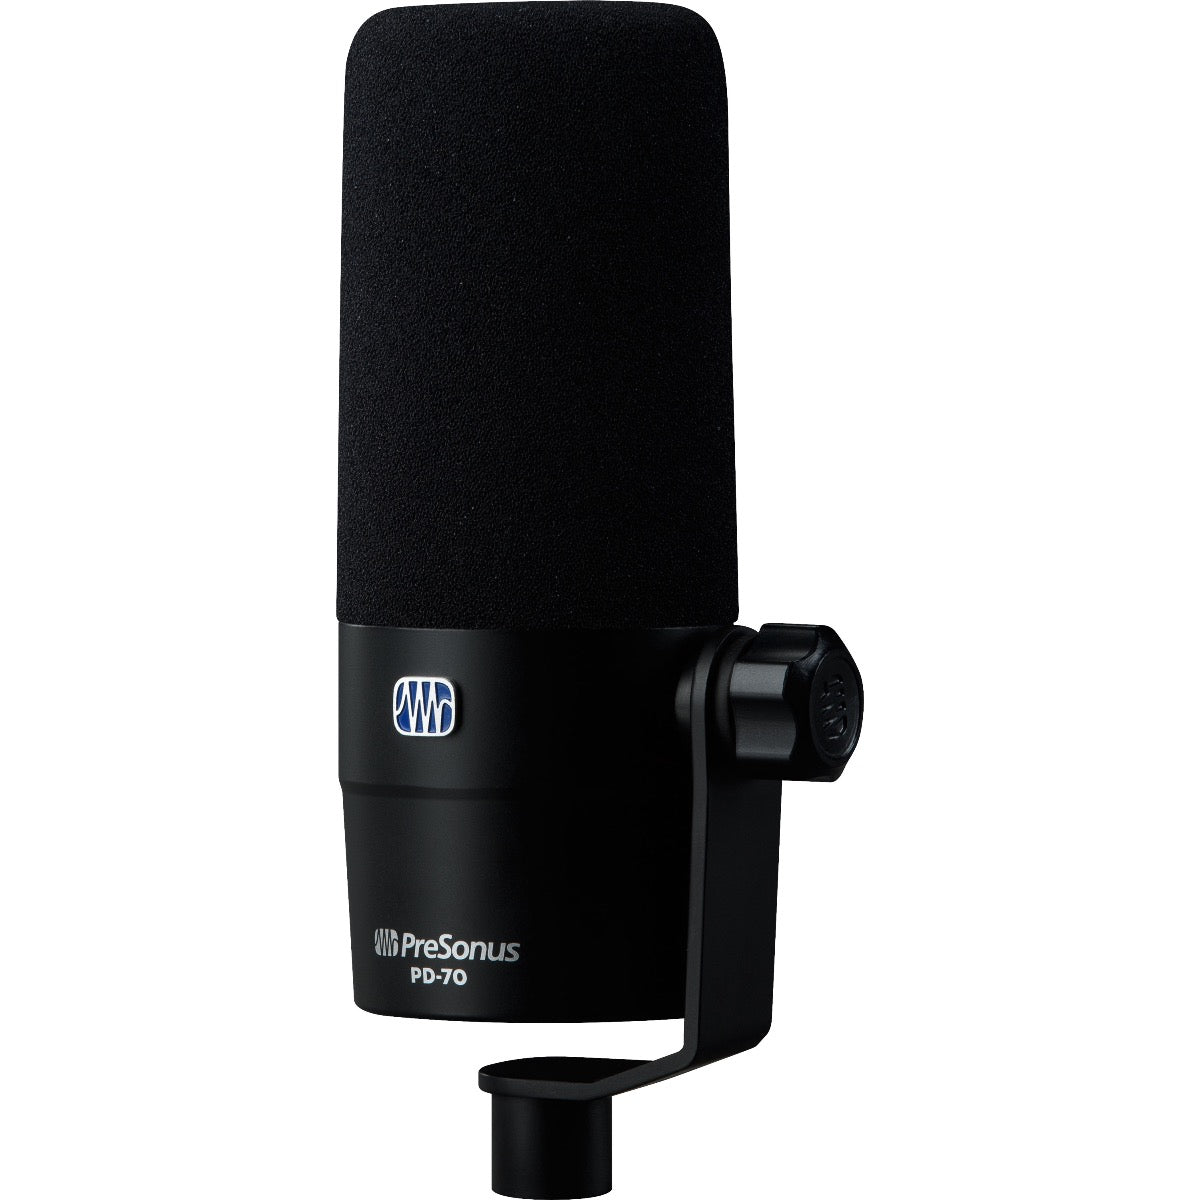 Perspective view of PreSonus PD-70 Broadcast Dynamic Microphone showing front and right side